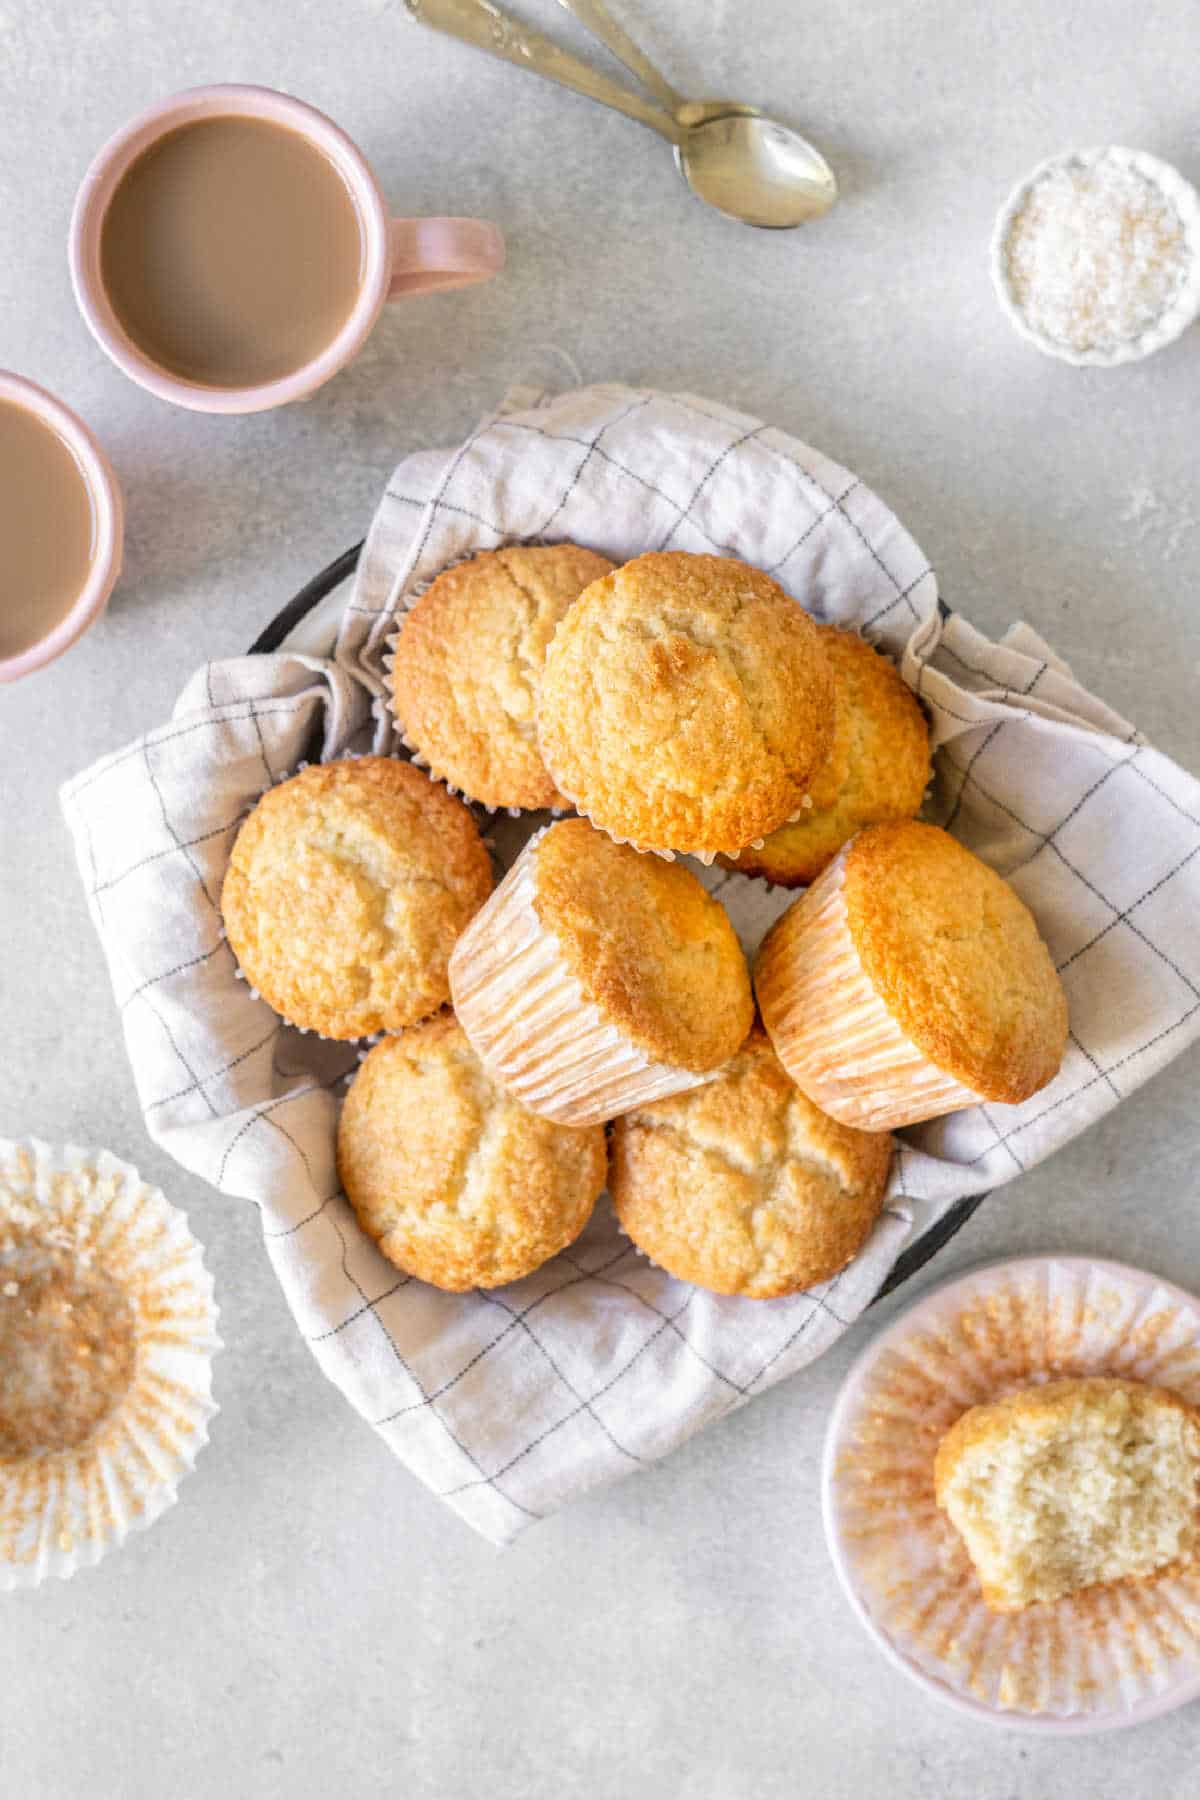 Pile of coconut muffins on a white checkered cloth. Light gray background. Coffee mugs. Top view.